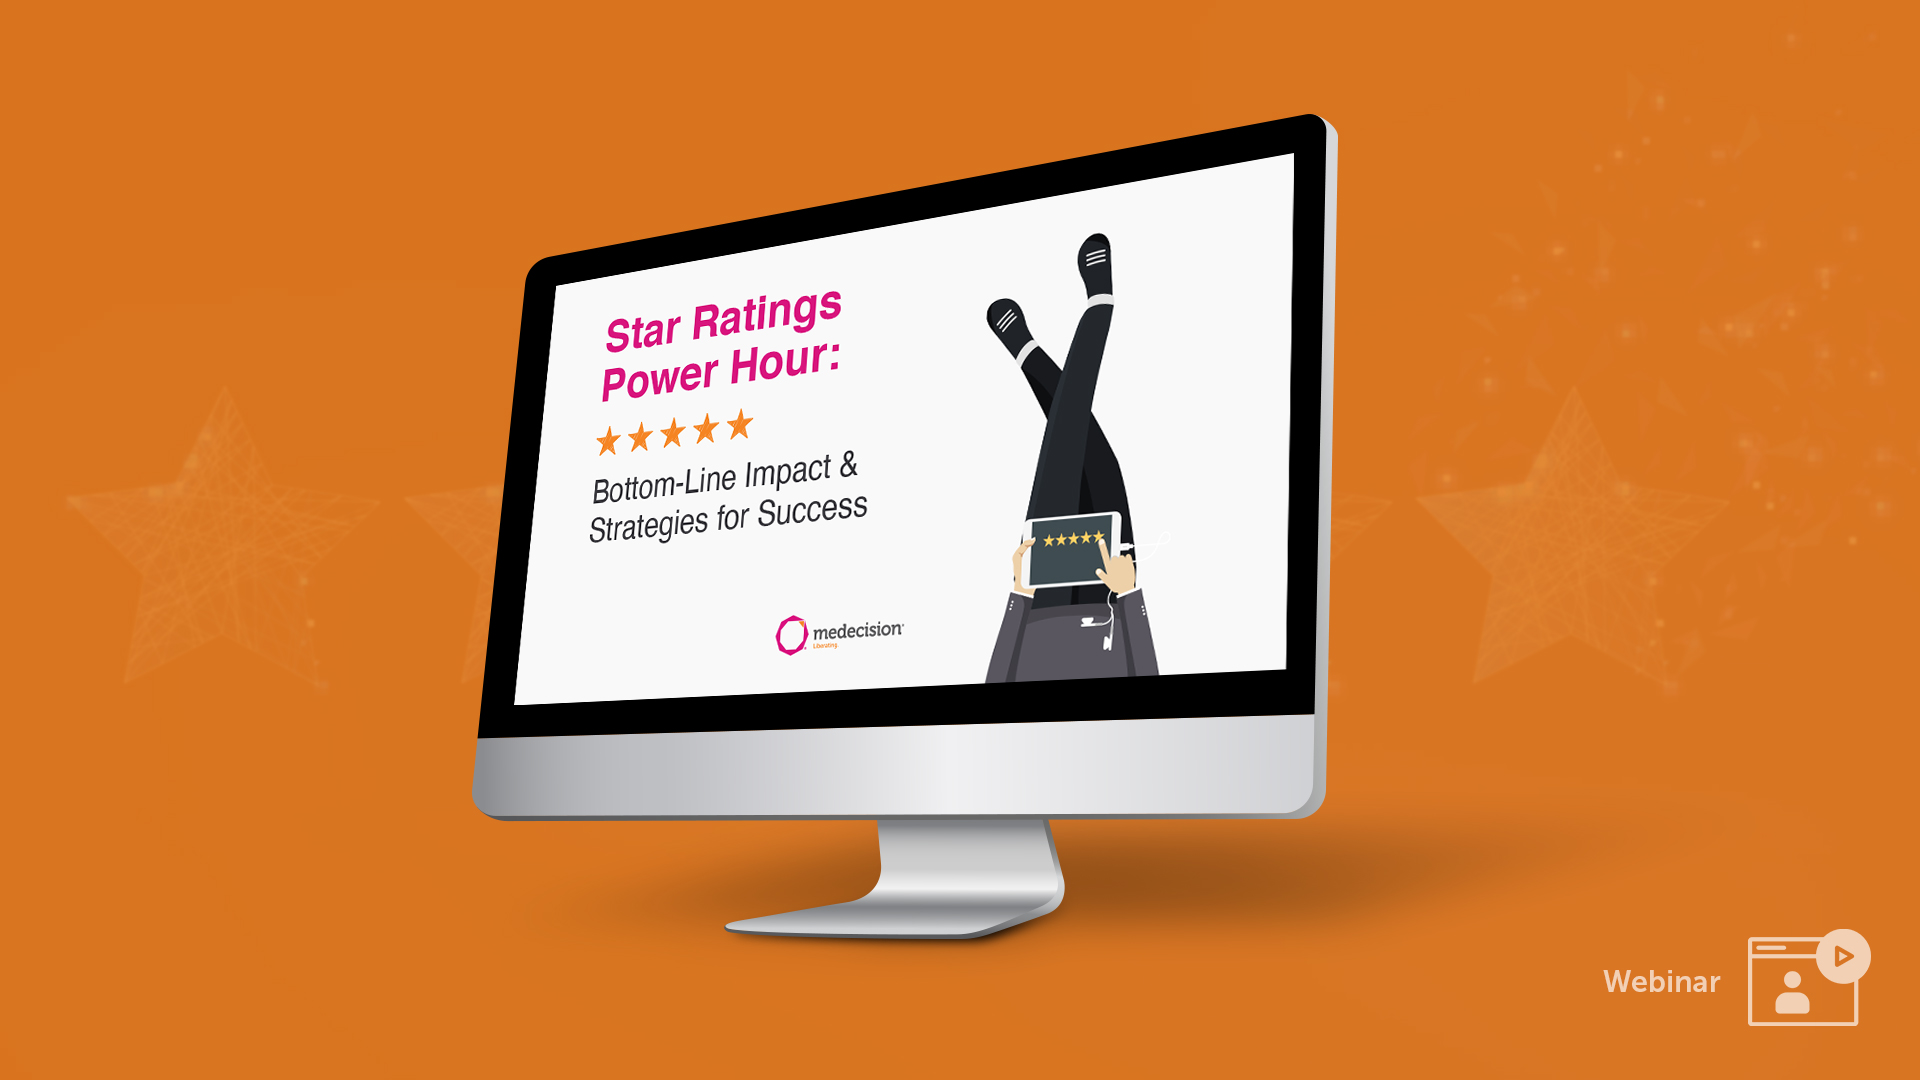 Star Ratings Power Hour - Bottom-Line Impact & Strategies for Success